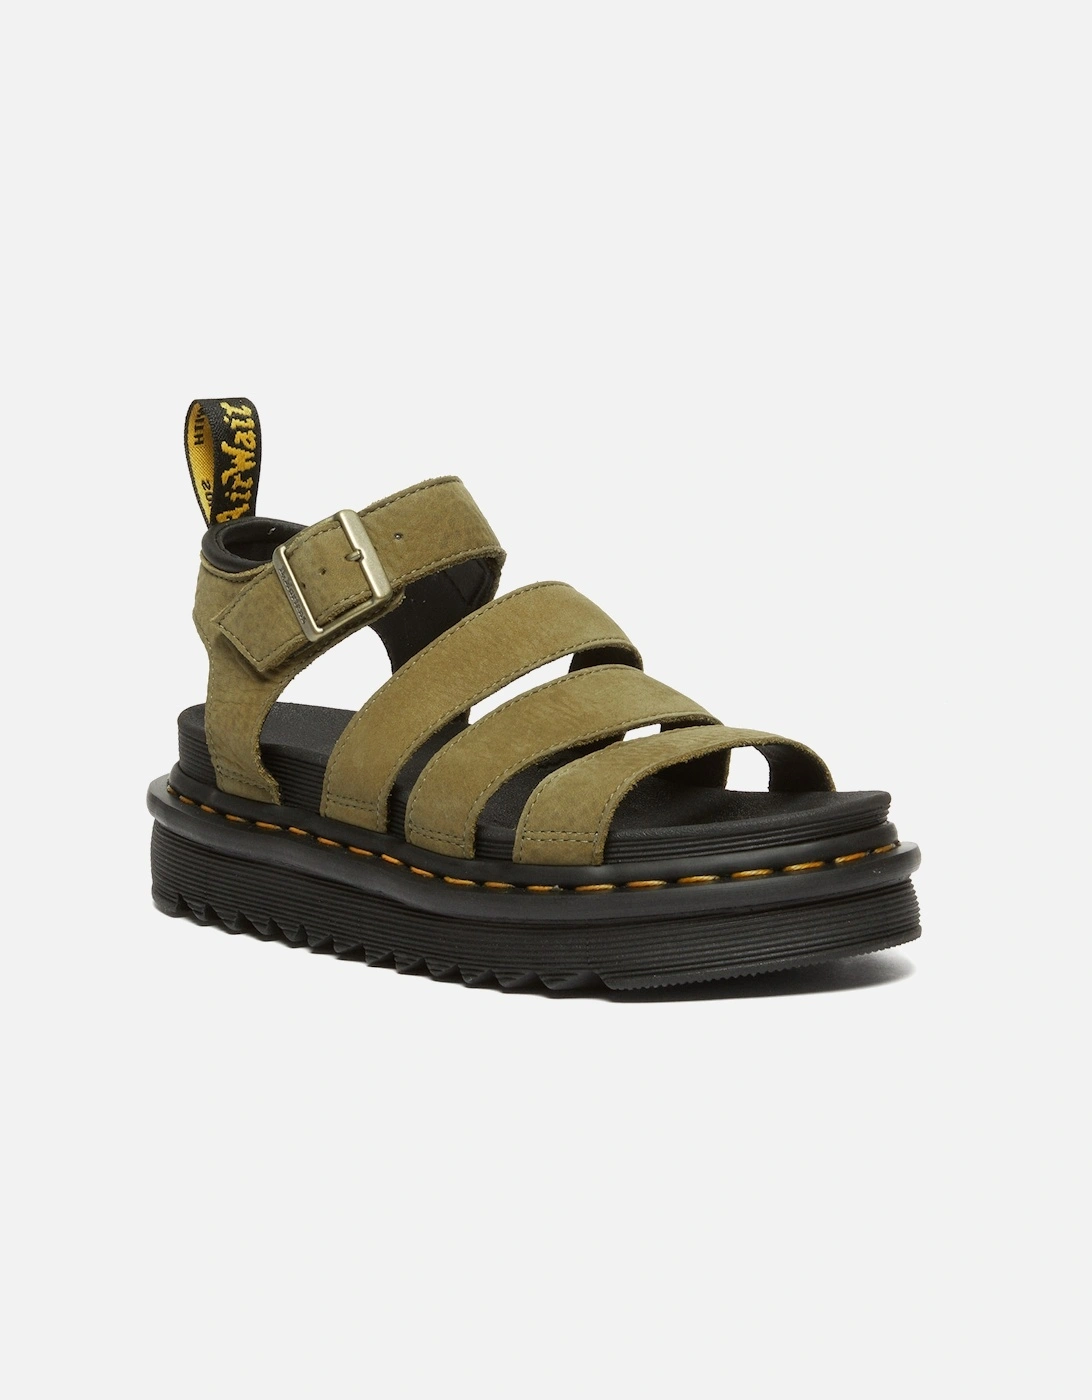 Dr. Martens Womens Blaire Tumbled Nubuck Sandals (Olive), 9 of 8